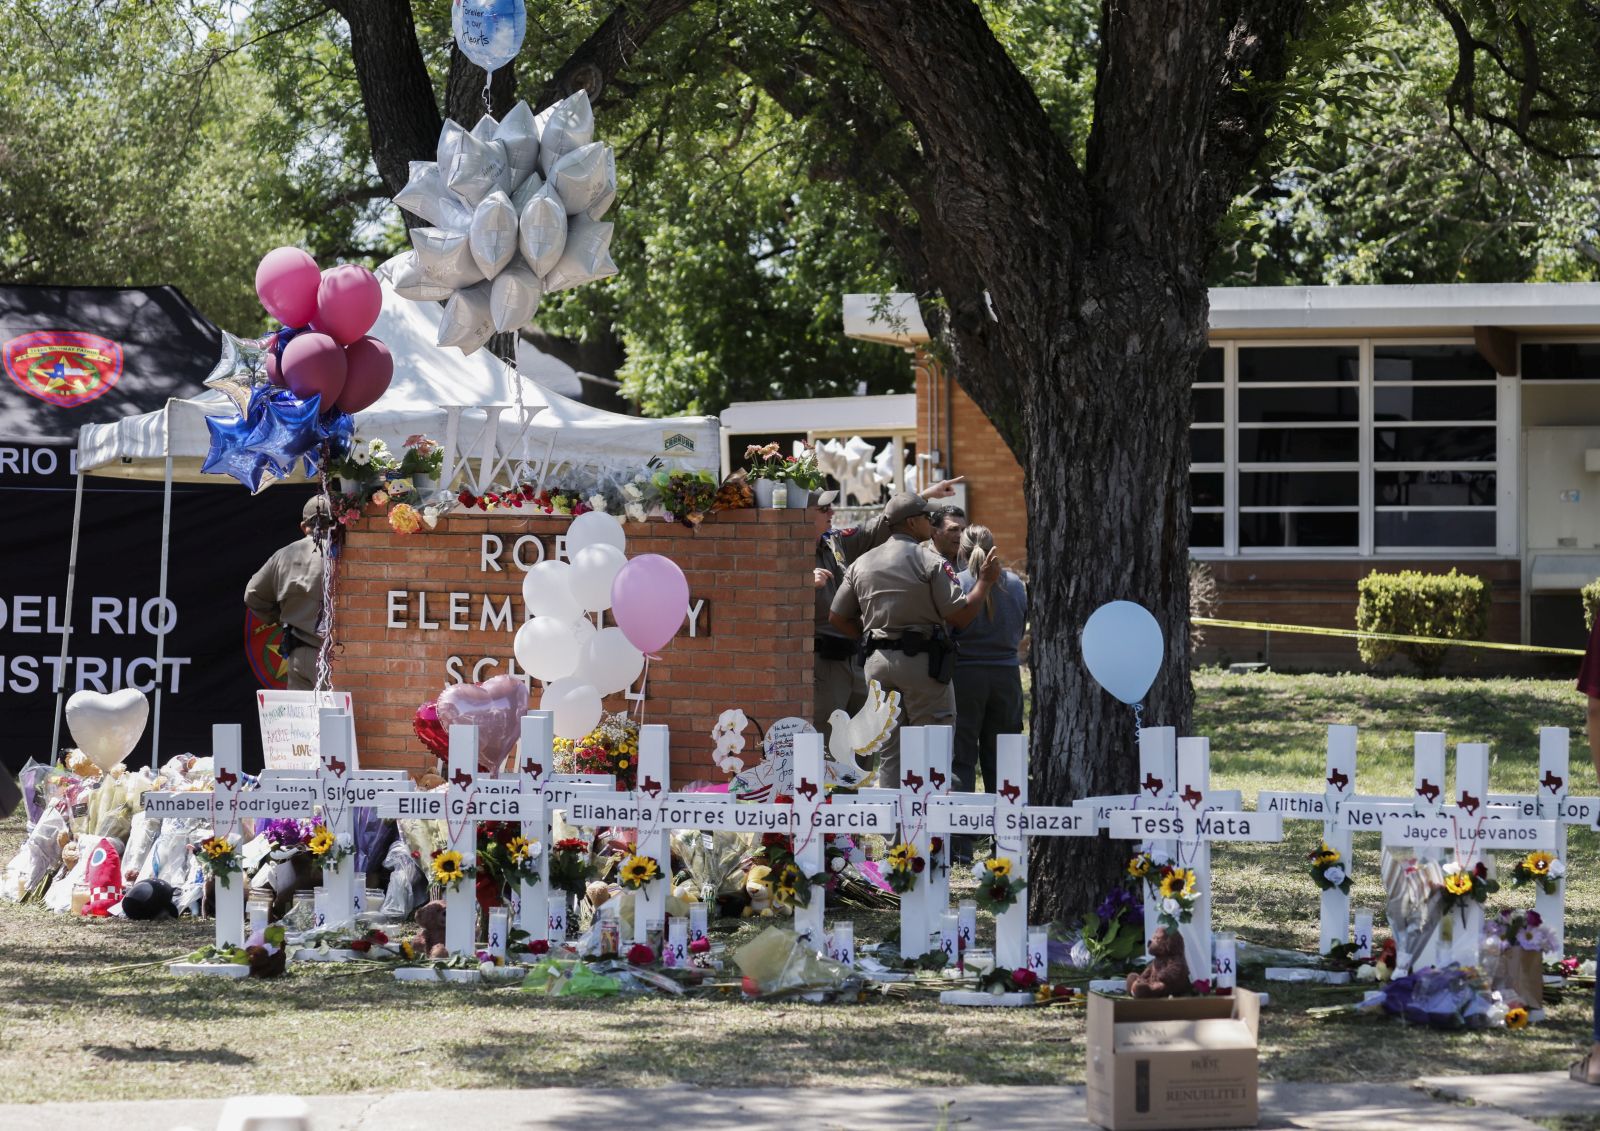 epa09978423 Crosses bearing names of victims line an area on school ground following a mass shooting at the Robb Elementary School in Uvalde, Texas, USA, 26 May 2022. According to Texas officials, at least 19 children and two adults were killed in the shooting on 24 May. The eighteen-year-old gunman was killed by responding officers.  EPA/TANNEN MAURY